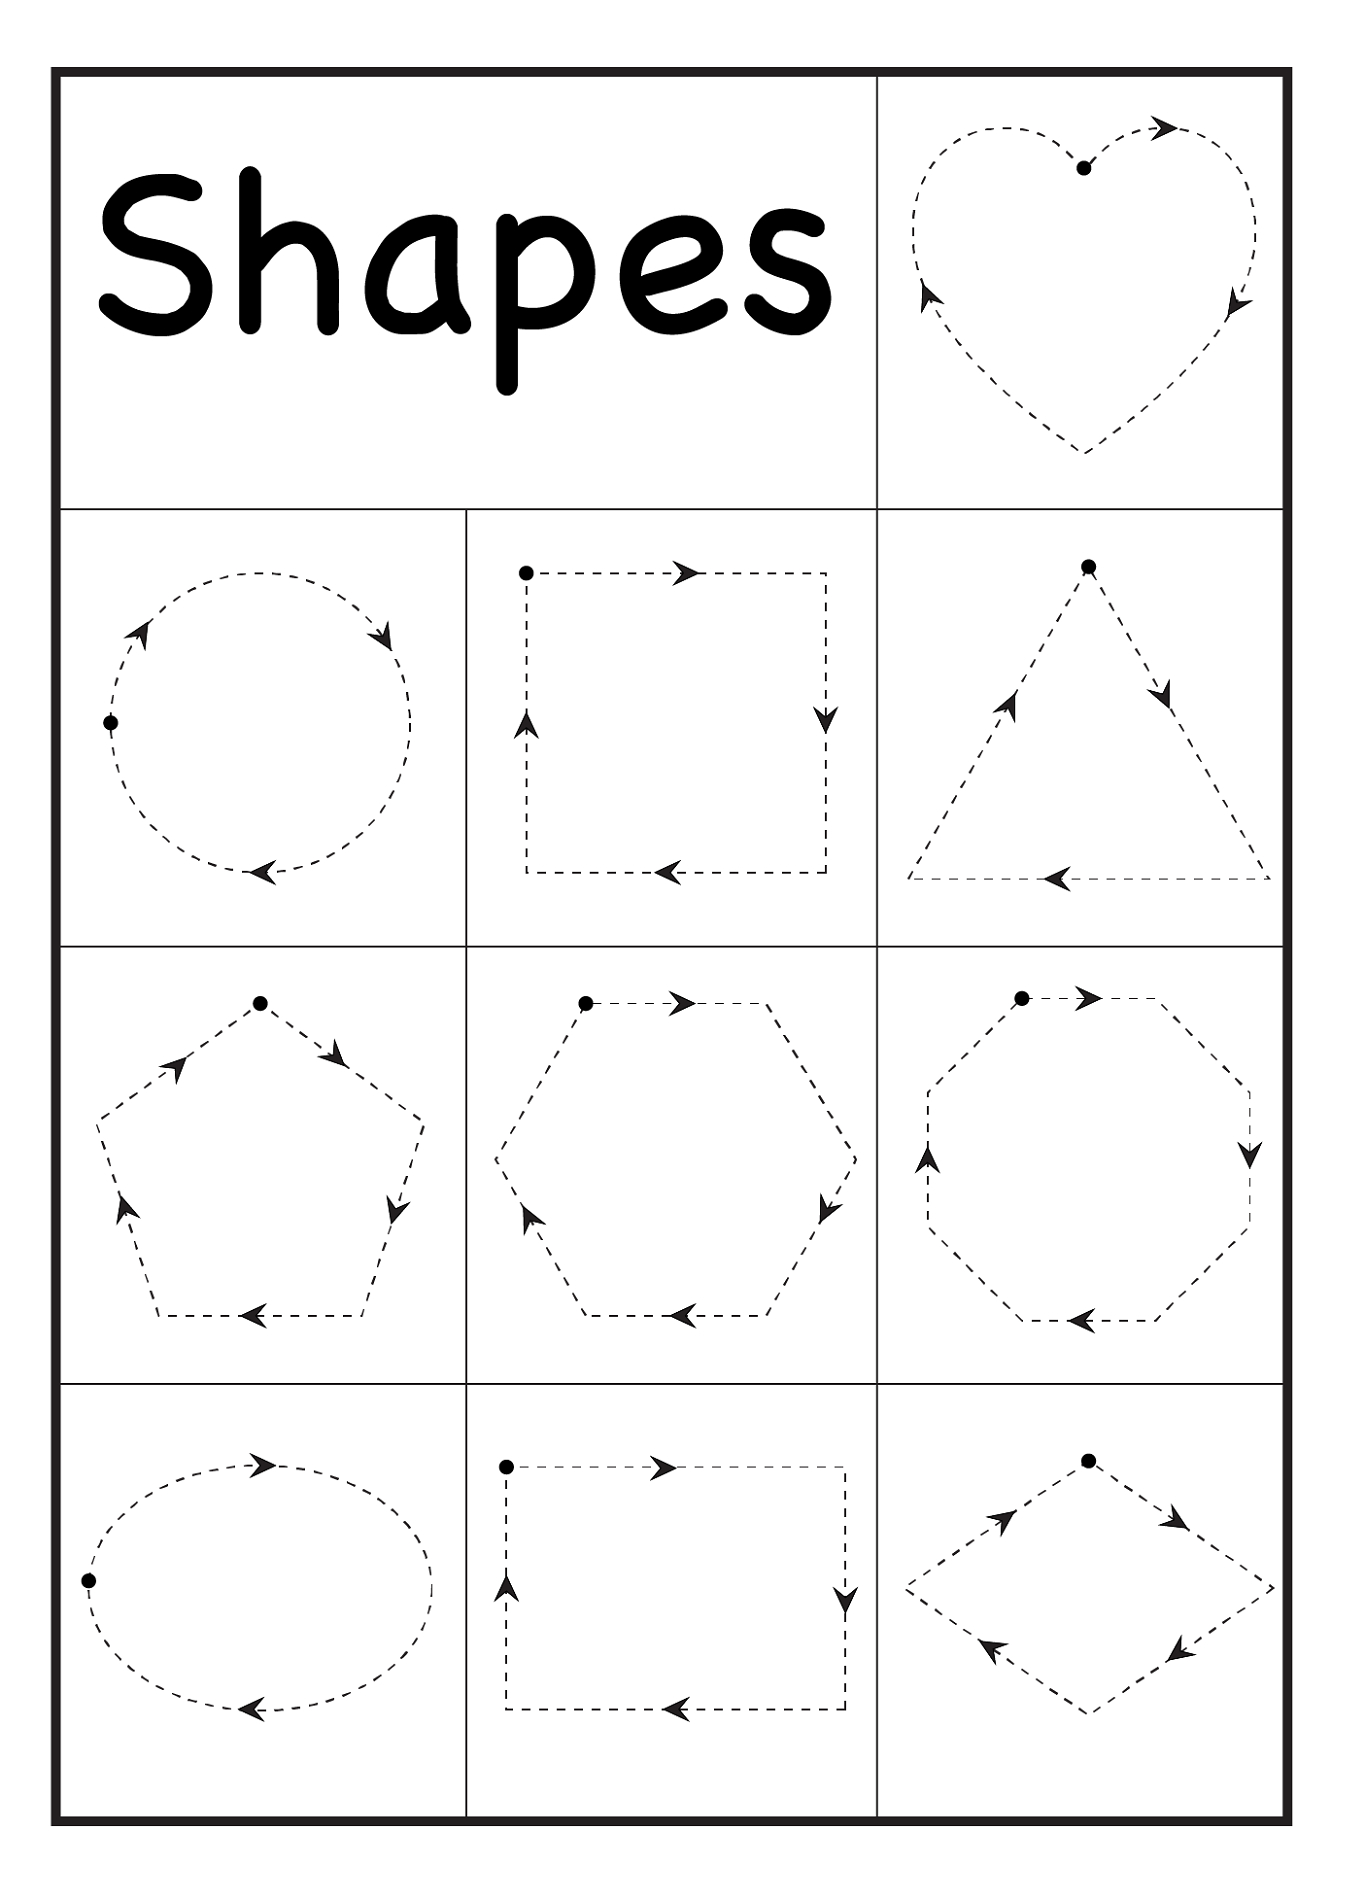 Printable Worksheets For 3 Year Olds That Are Astounding regarding Letter B Worksheets For 3 Year Olds